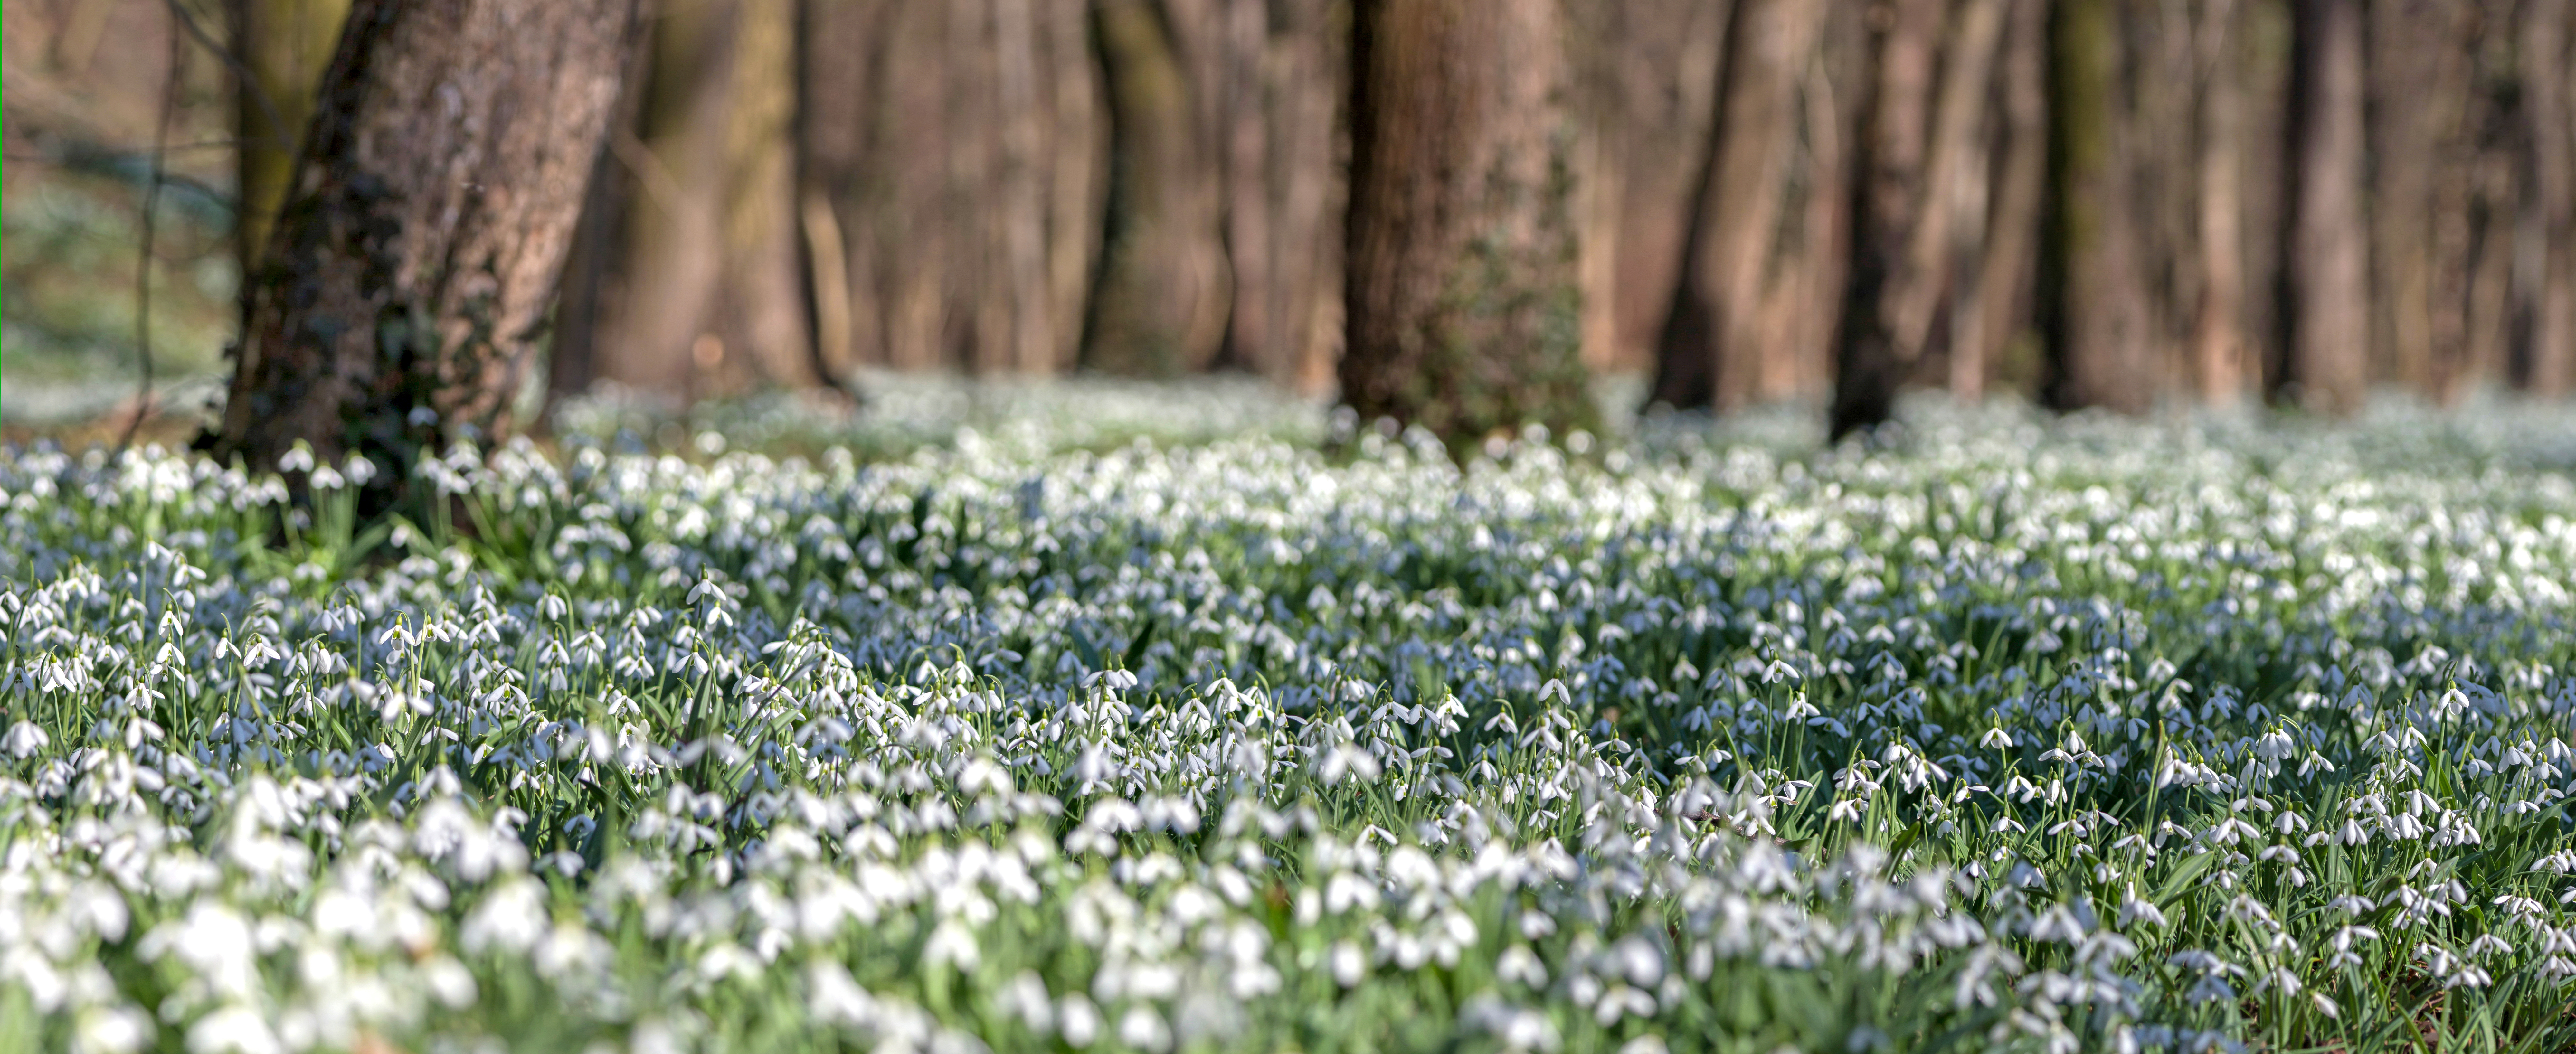 Swathes of snowdrops in a wodland setting.